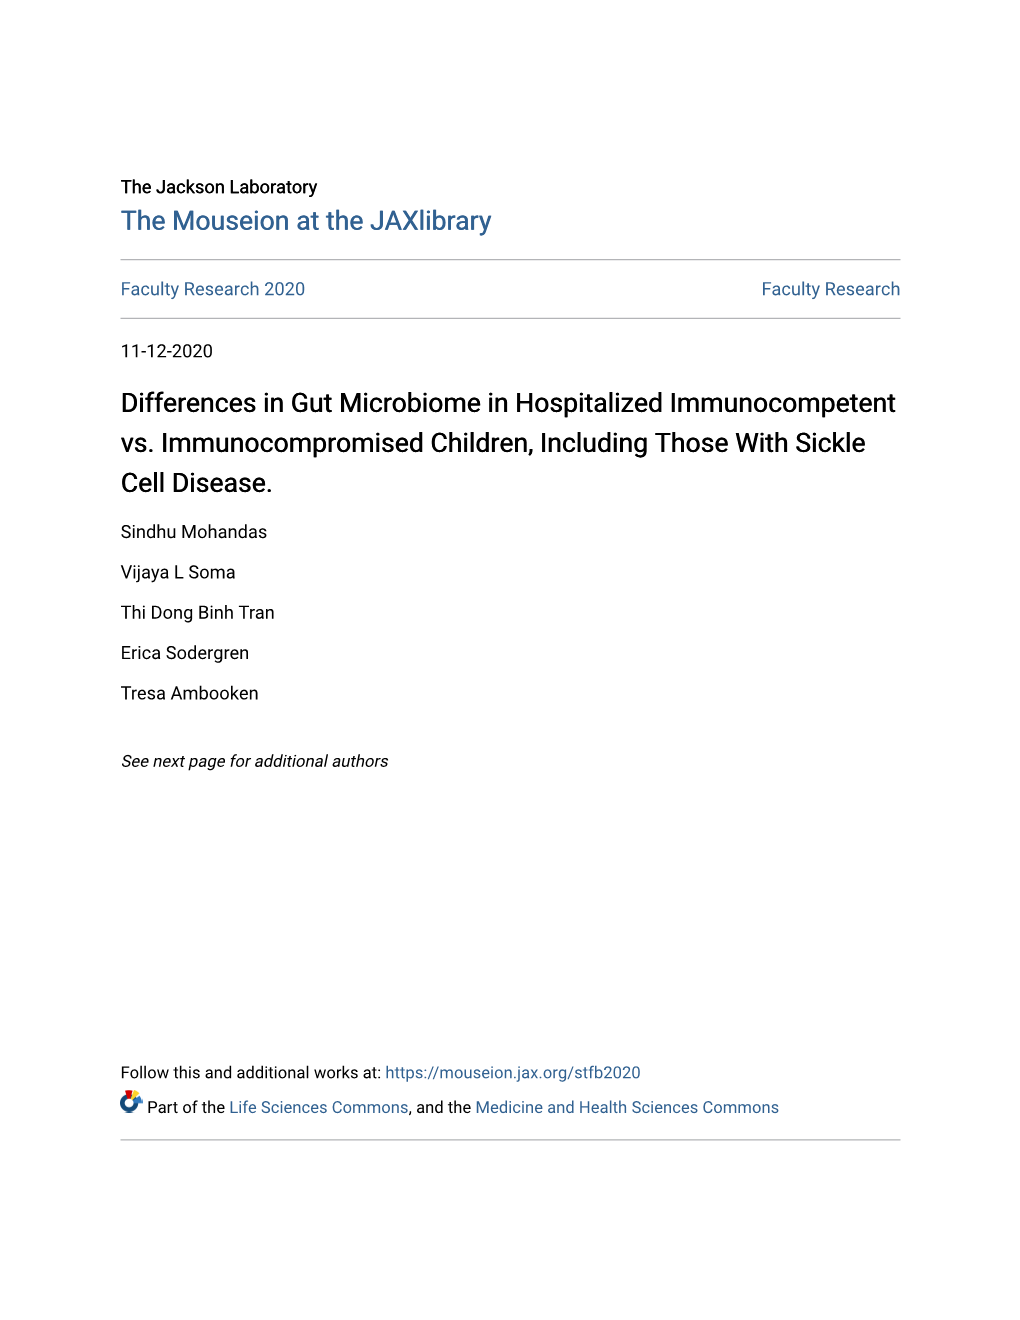 Differences in Gut Microbiome in Hospitalized Immunocompetent Vs